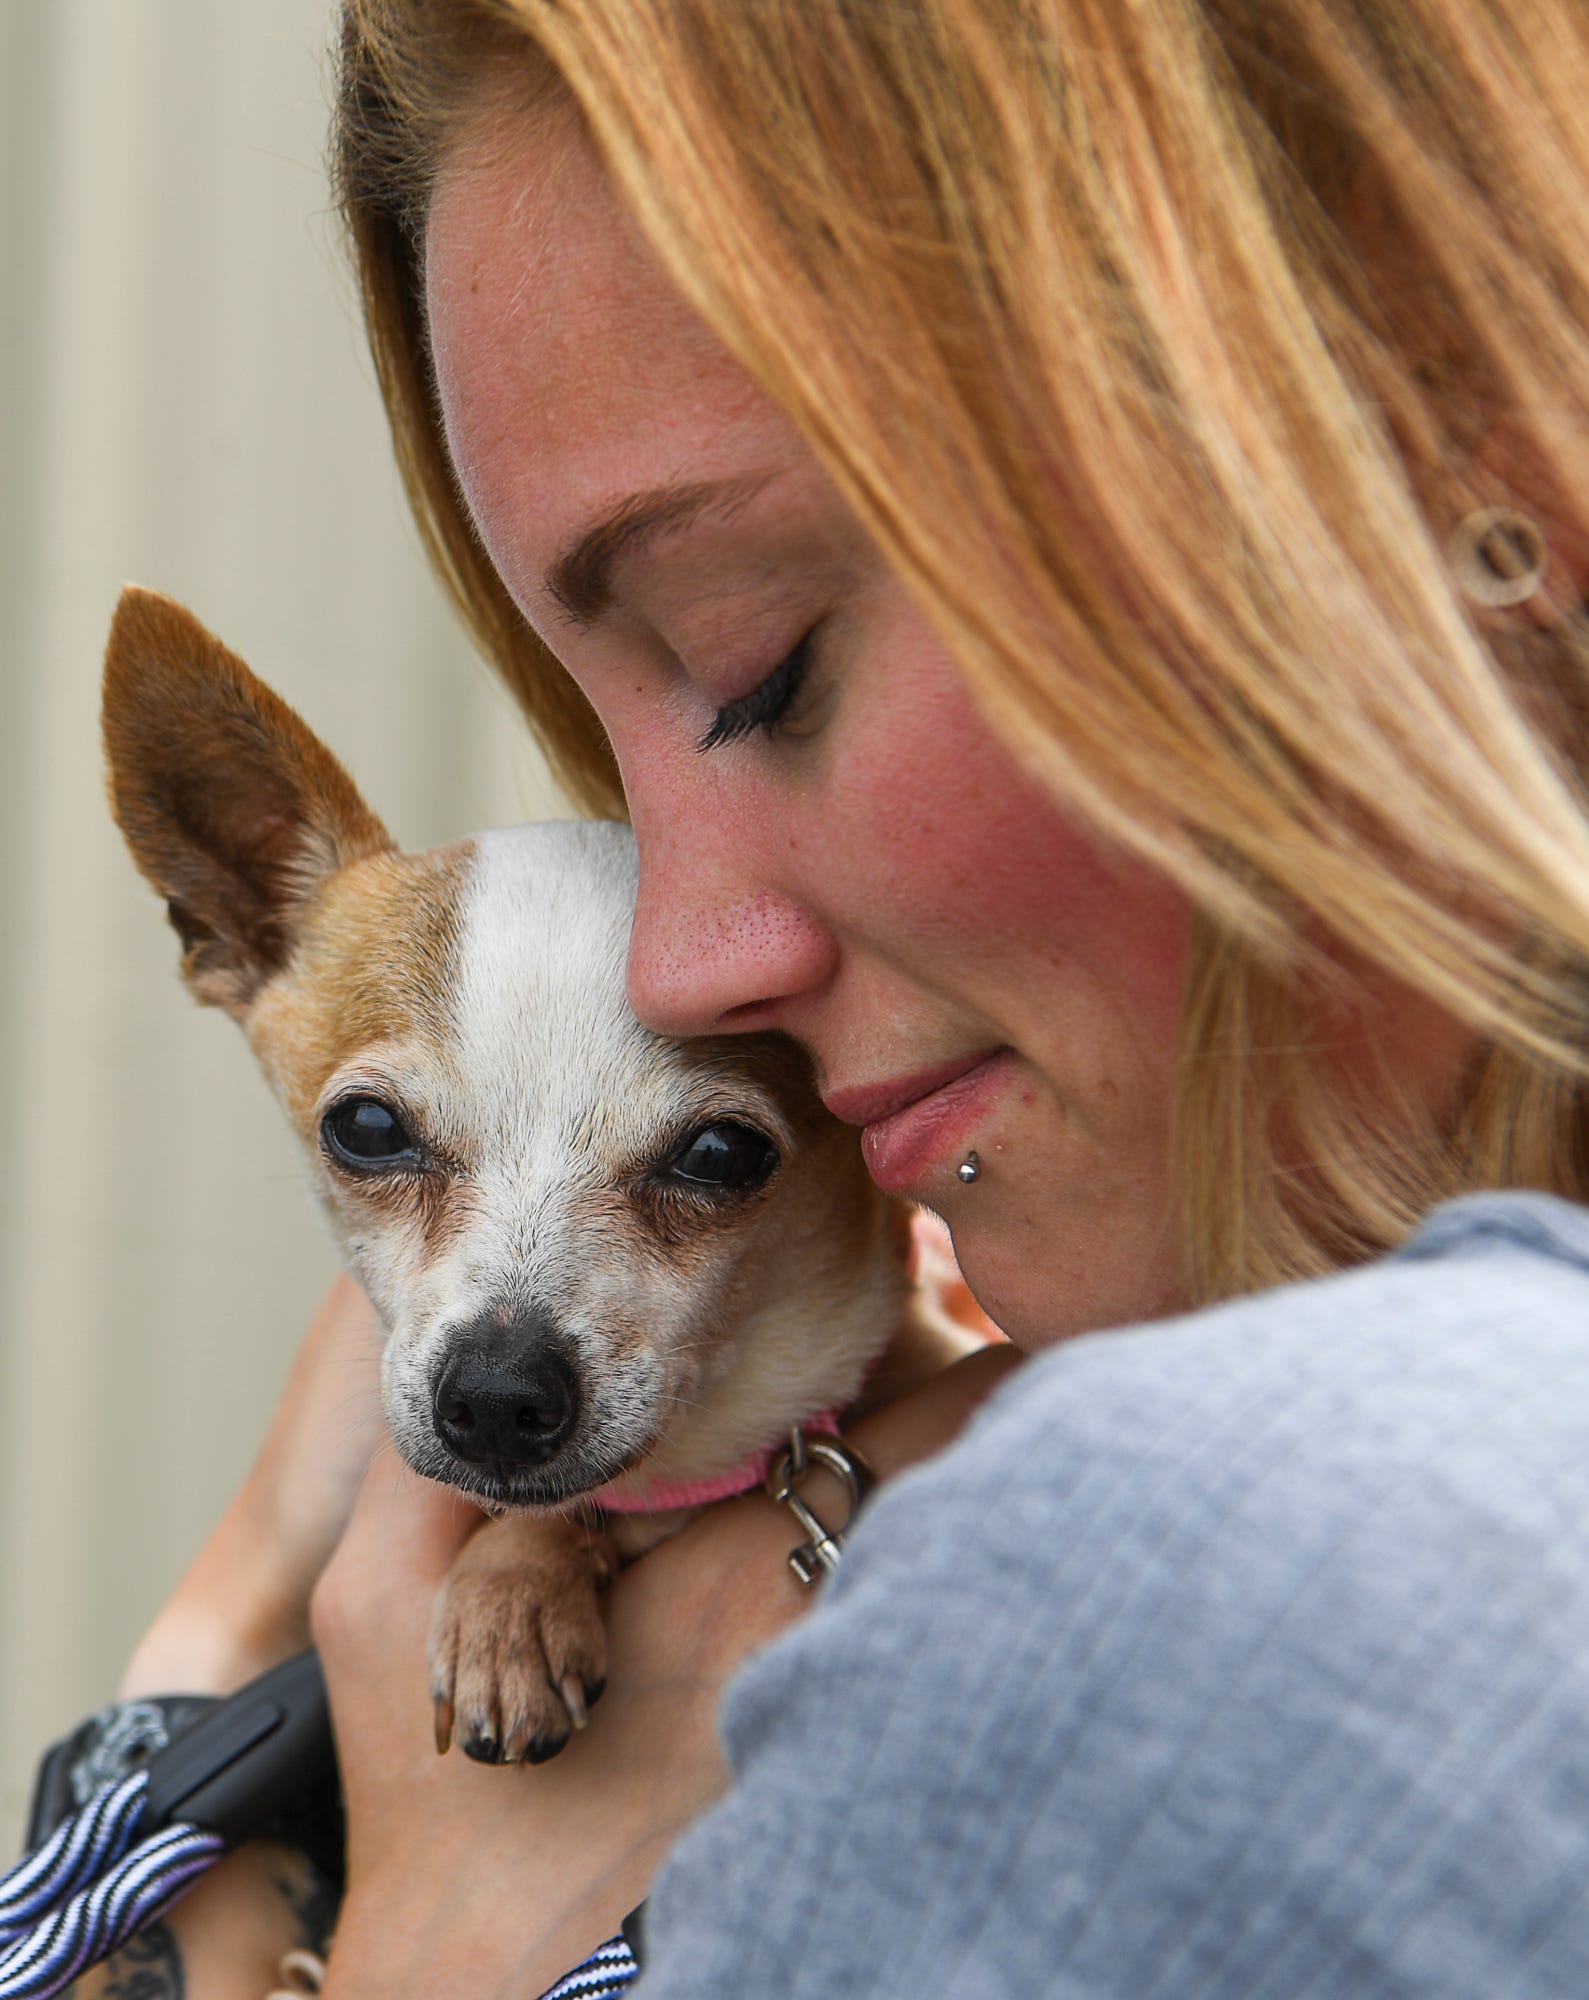 Alexis Regula is reunited with her dog Lucy who she lost nine years ago while living in Tennessee, Thursday, September 10, 2020.
John A. Pavoncello photo